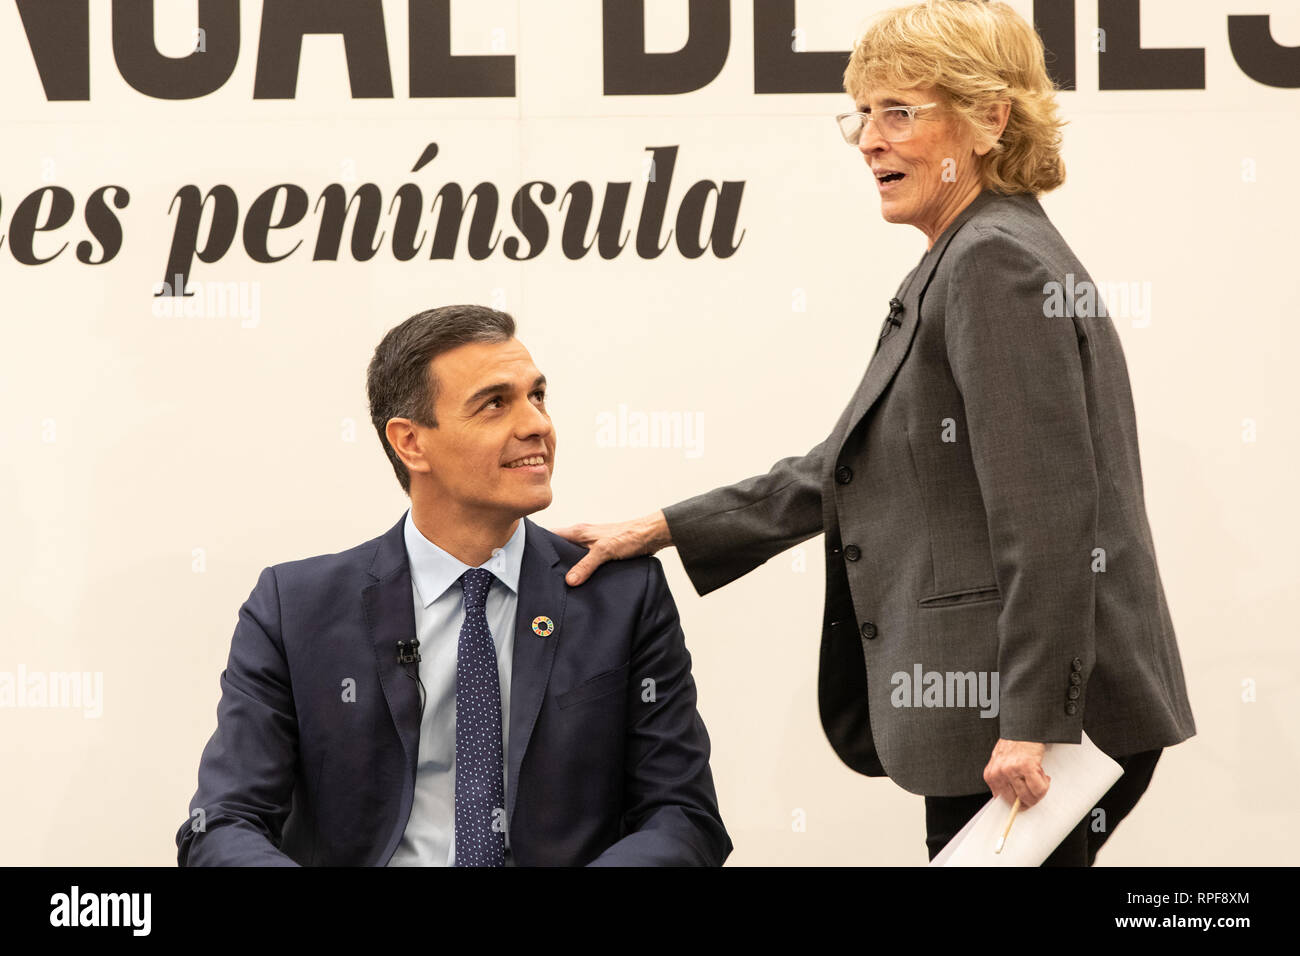 Madrid, Spain. 21st Feb 2019. The President of the Government, Pedro Sánchez and Mercedes Mila speaking about the book. Credit: Jesús Hellin/Alamy Live News Stock Photo